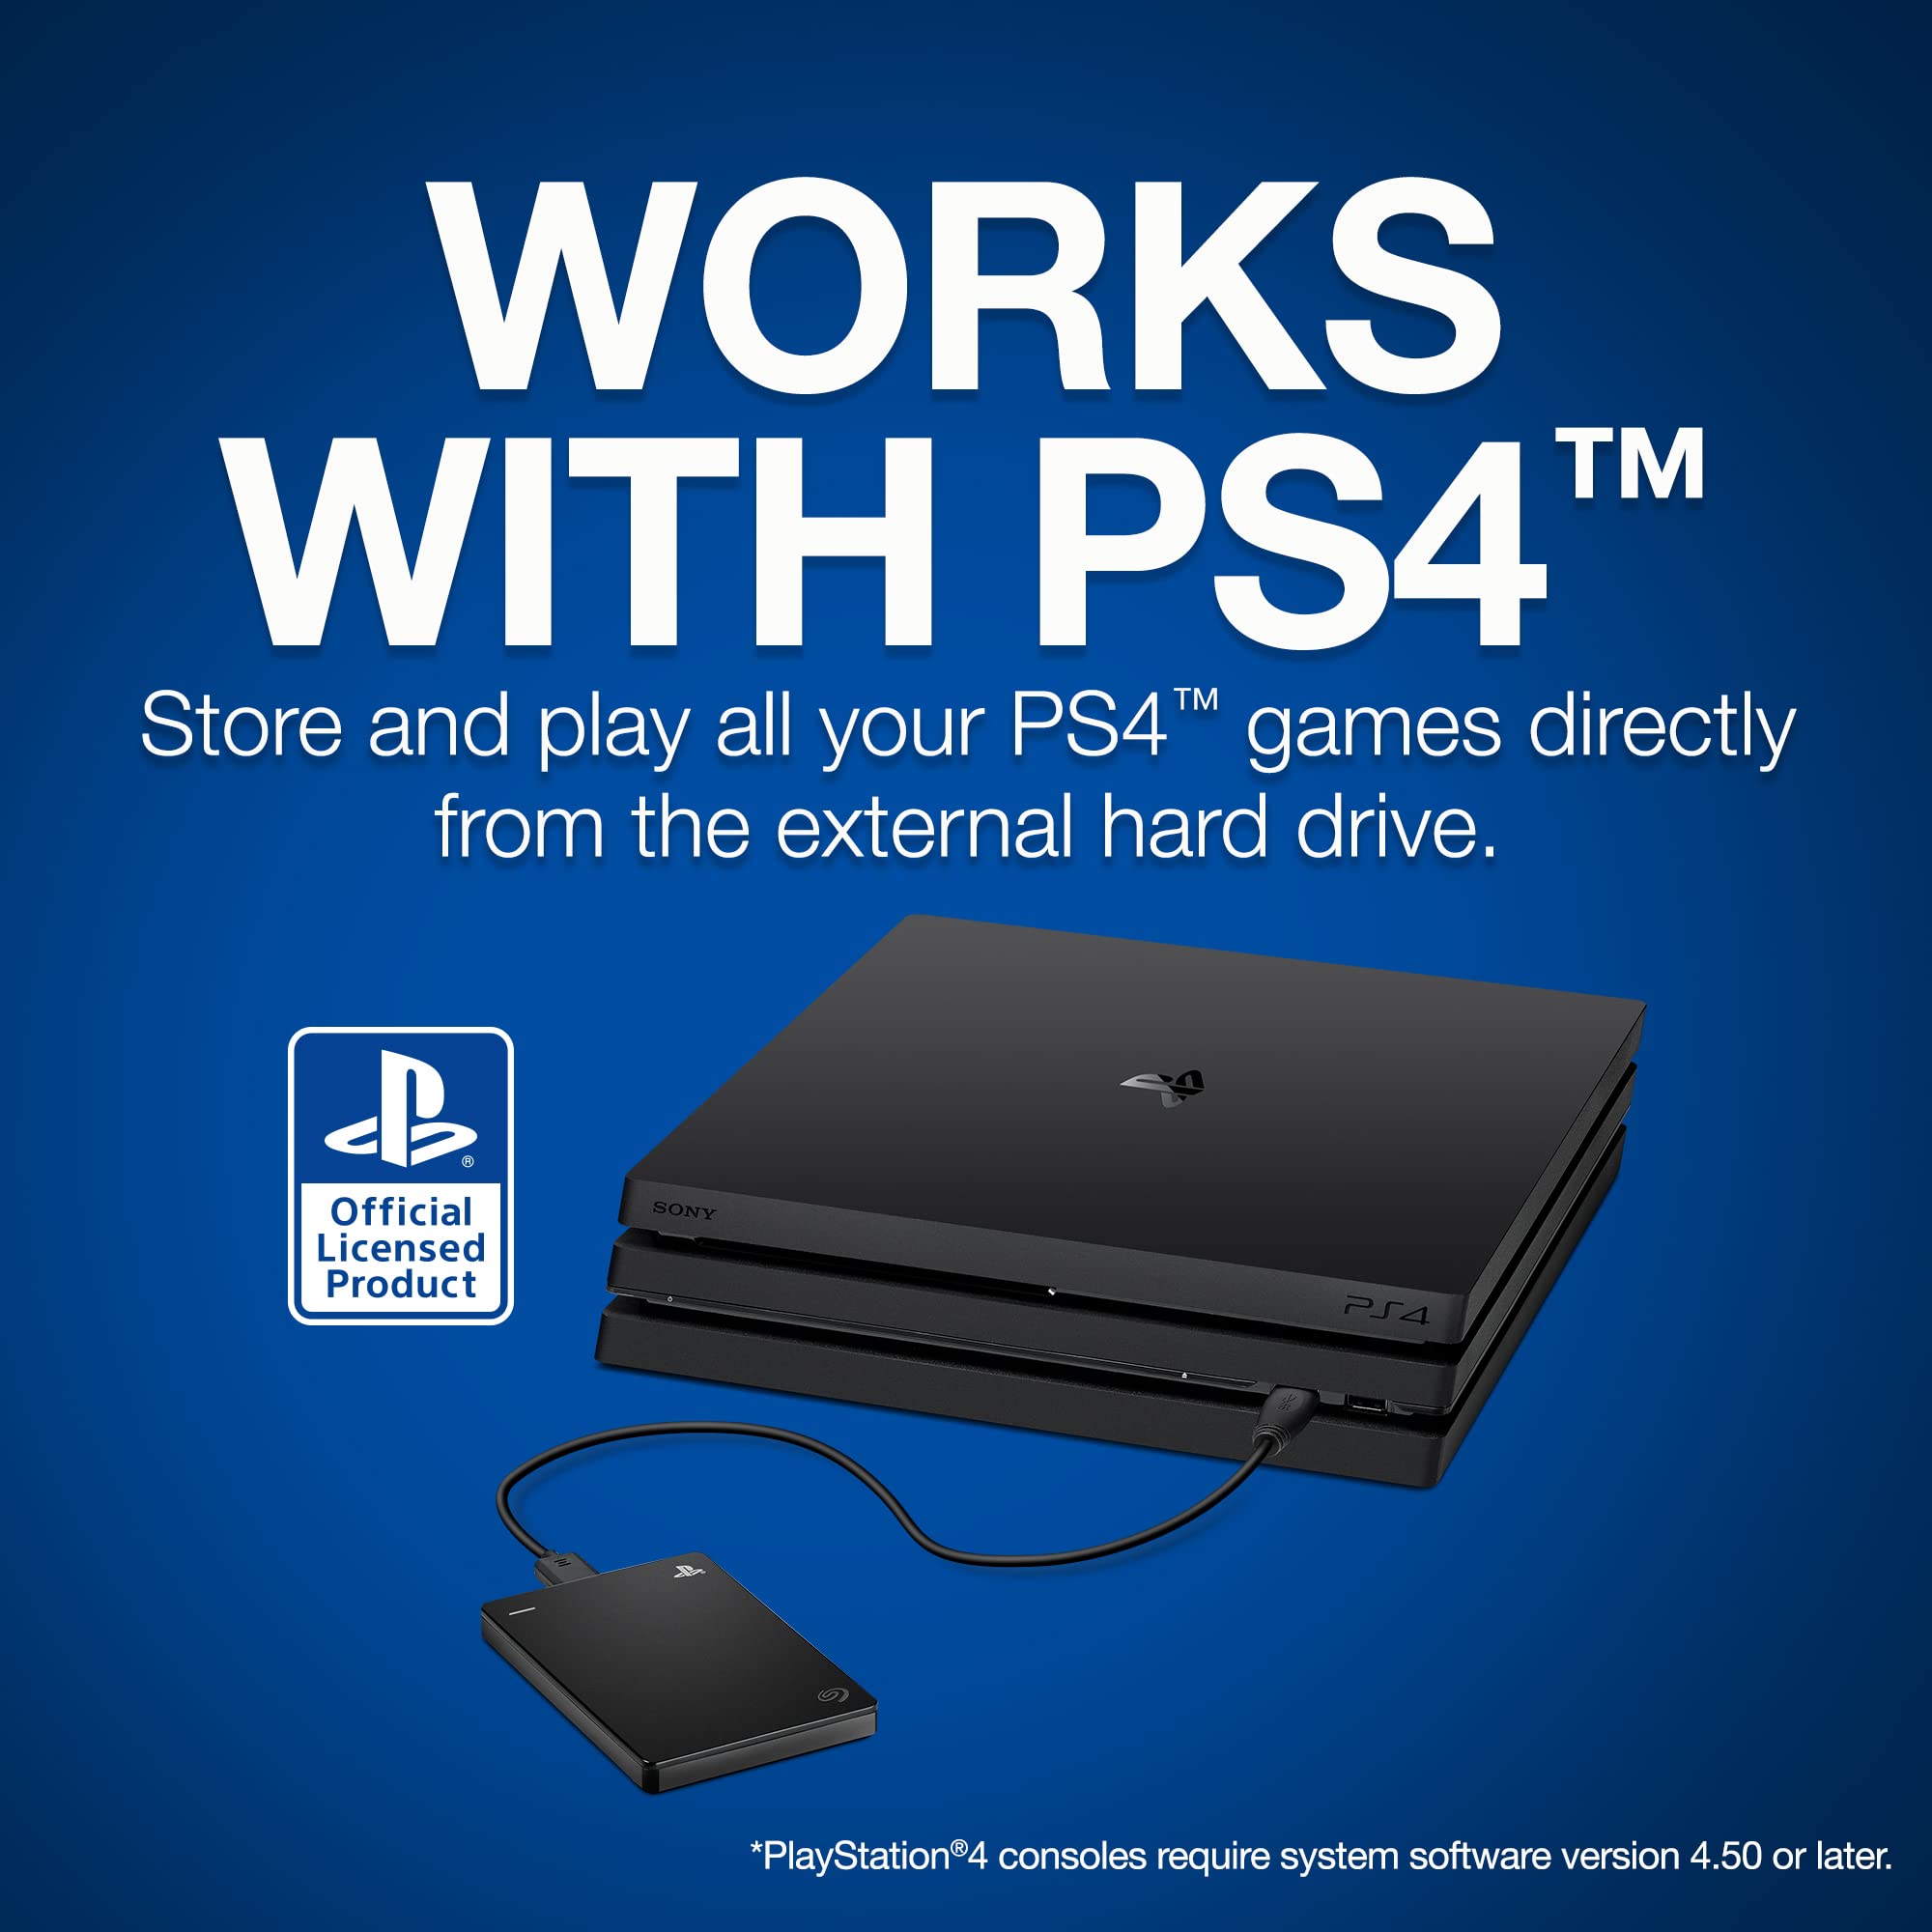 External hard drive connected to a PS4